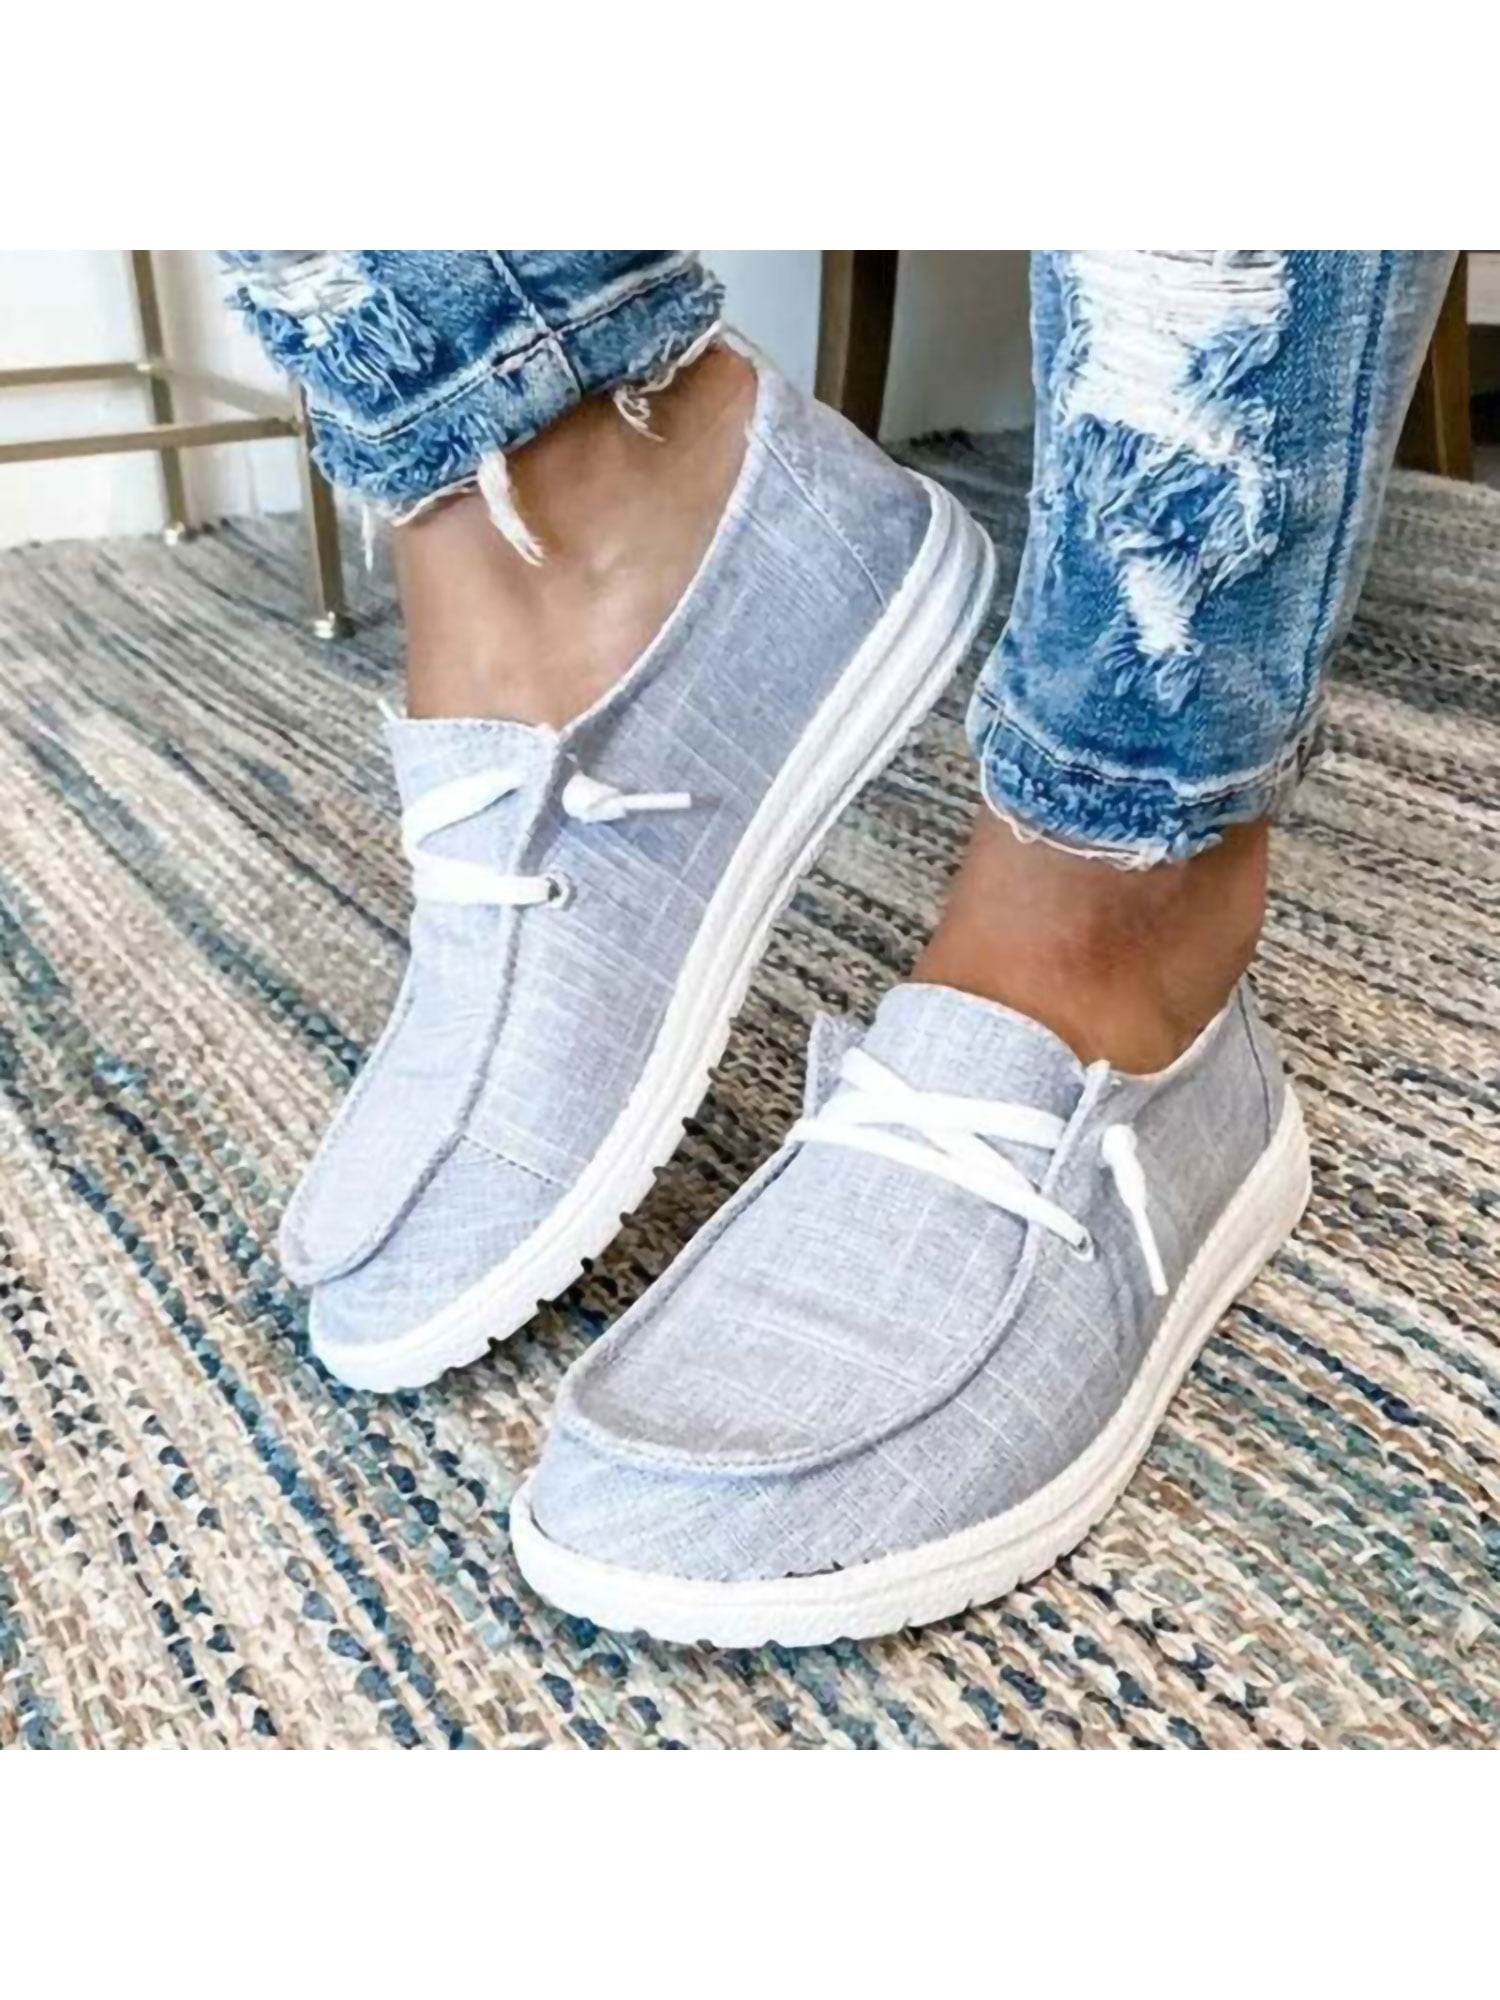 Womens Slip-on Loafer Rock Band Decor Fashion Sneaker Casual Flat Walking Shoes Canvas 